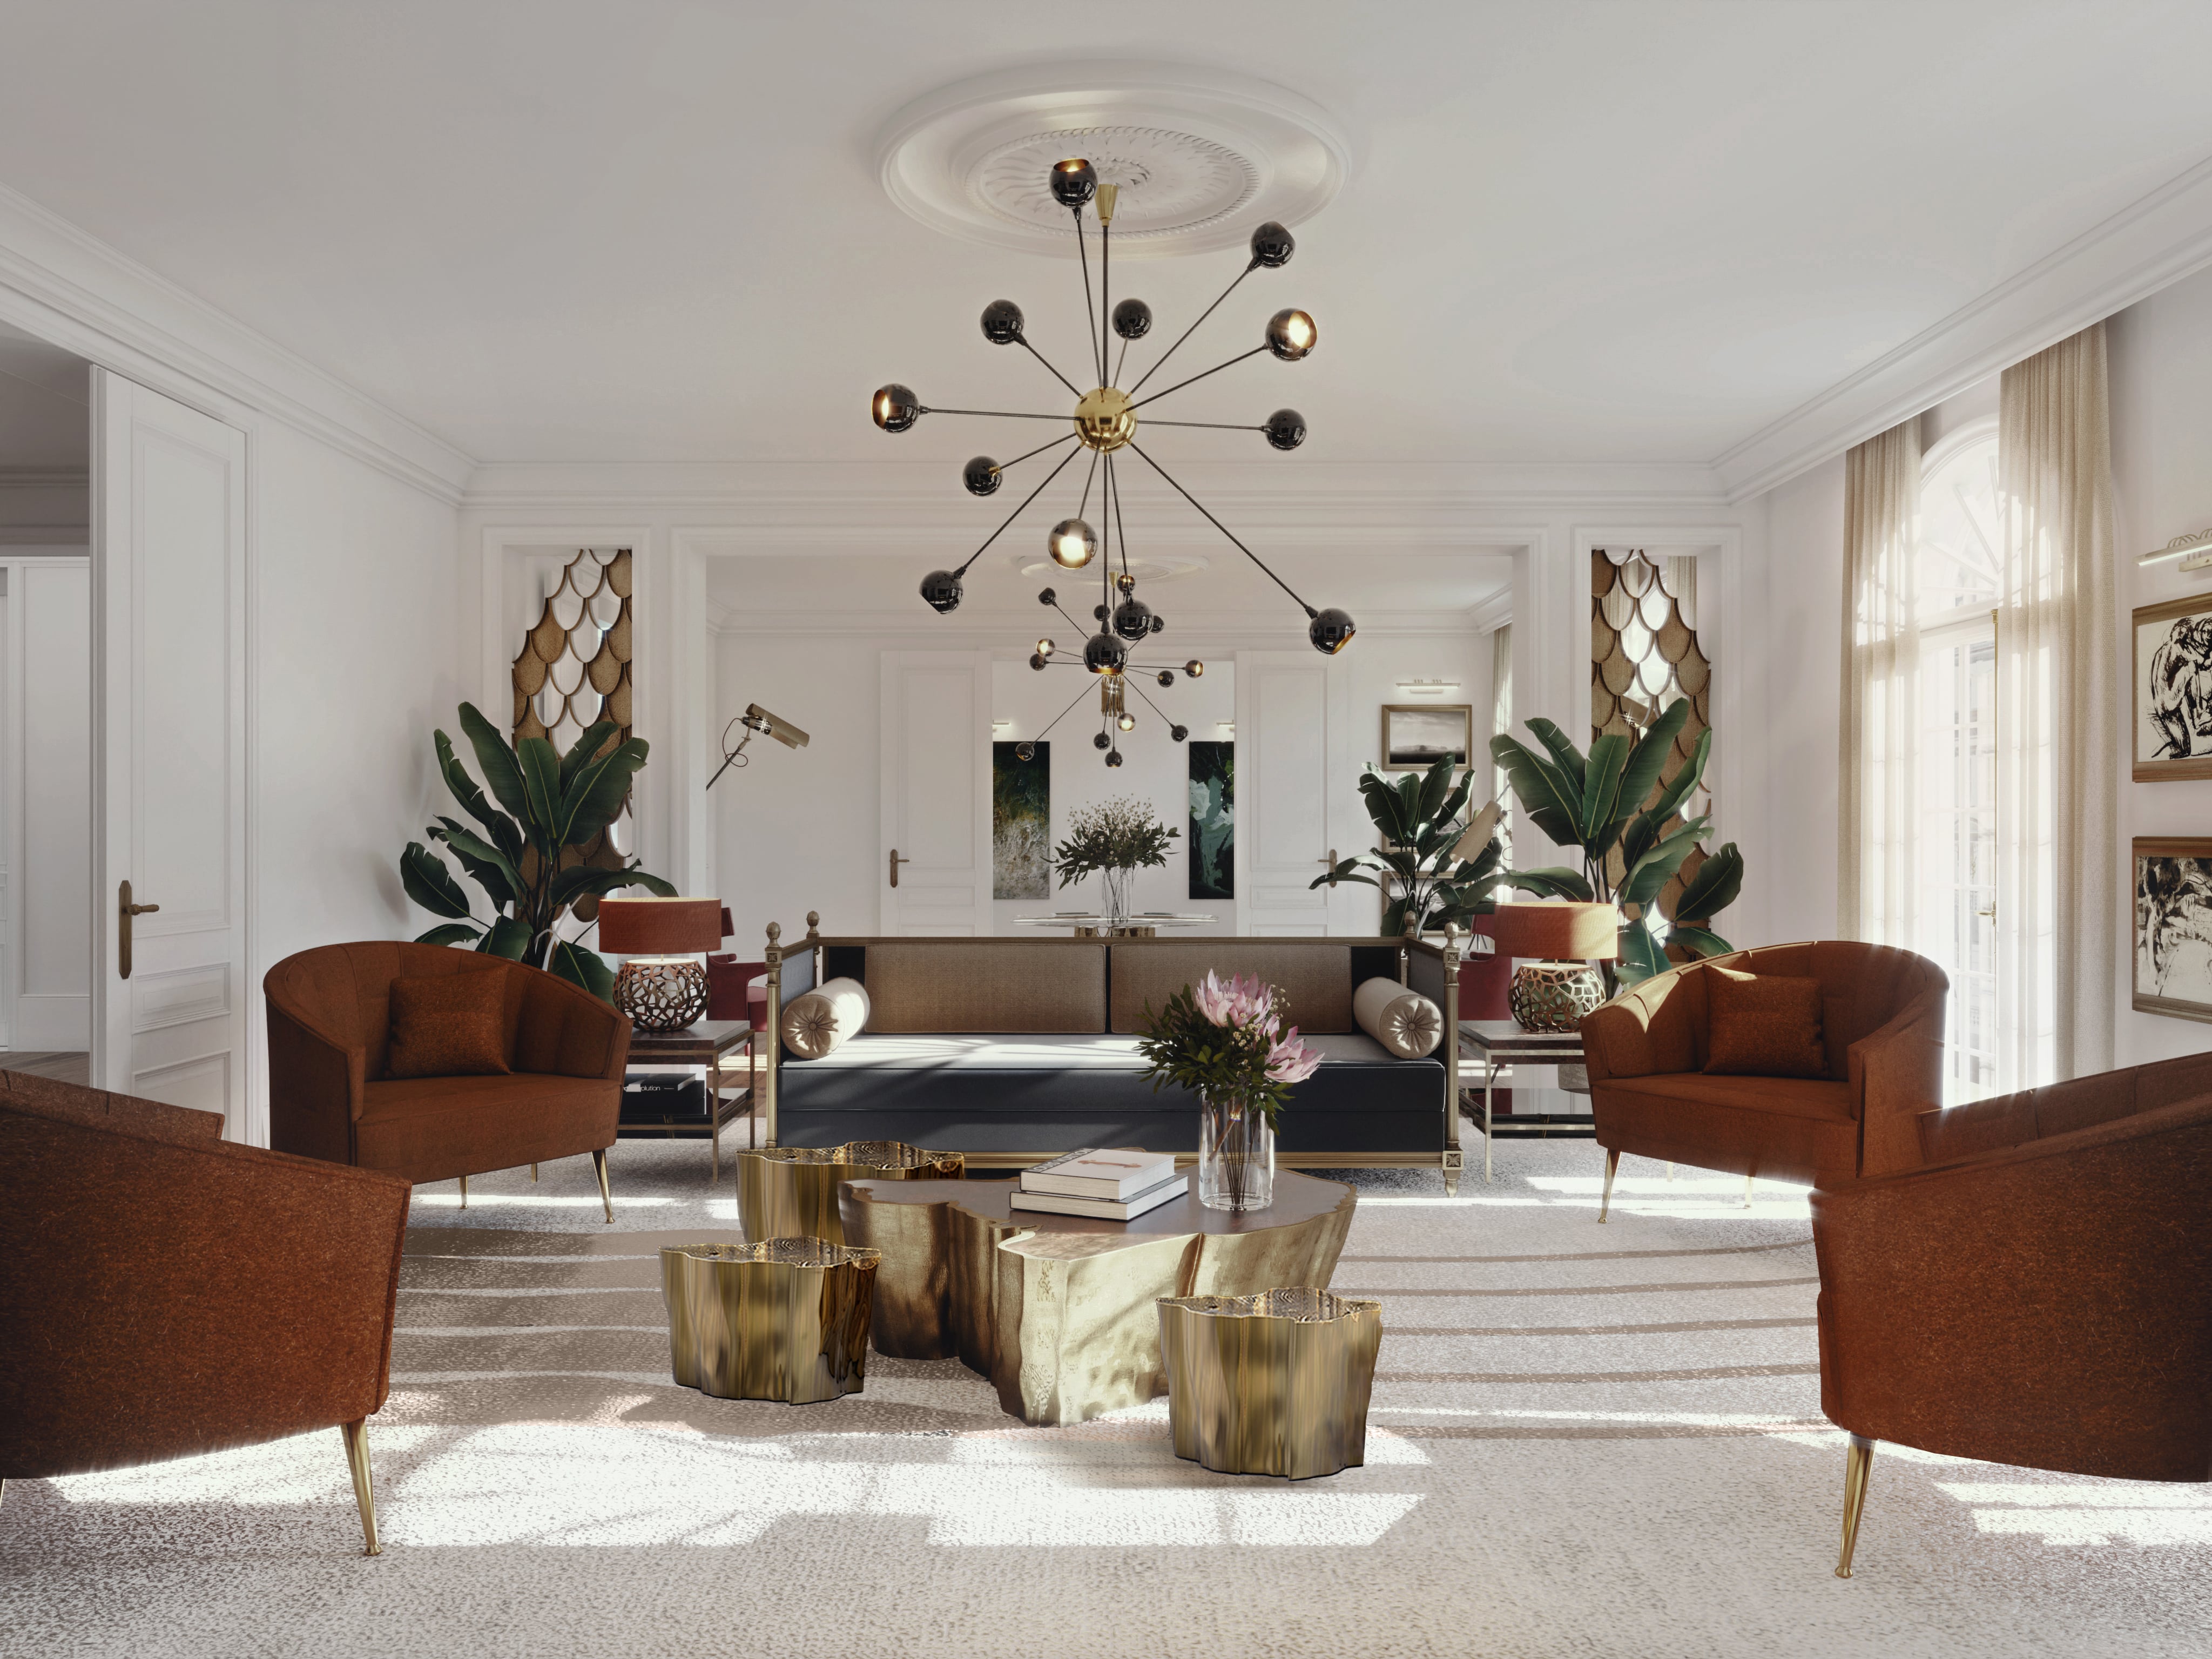 Sophisticated Living Room Design With Golden Accents And Warm Tones - Home'Society